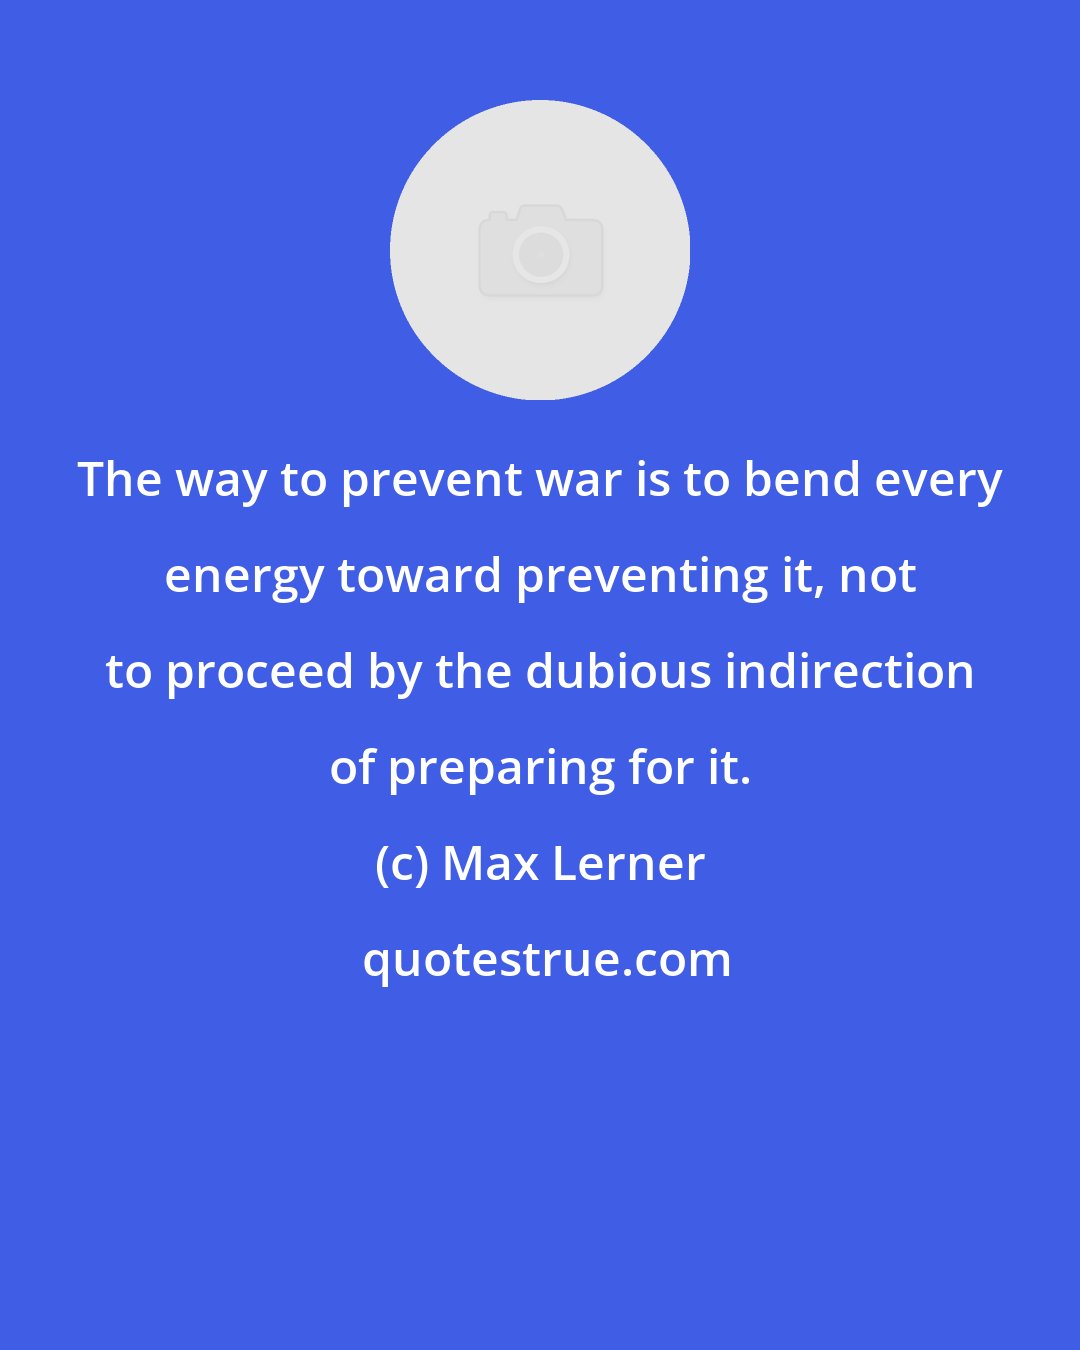 Max Lerner: The way to prevent war is to bend every energy toward preventing it, not to proceed by the dubious indirection of preparing for it.